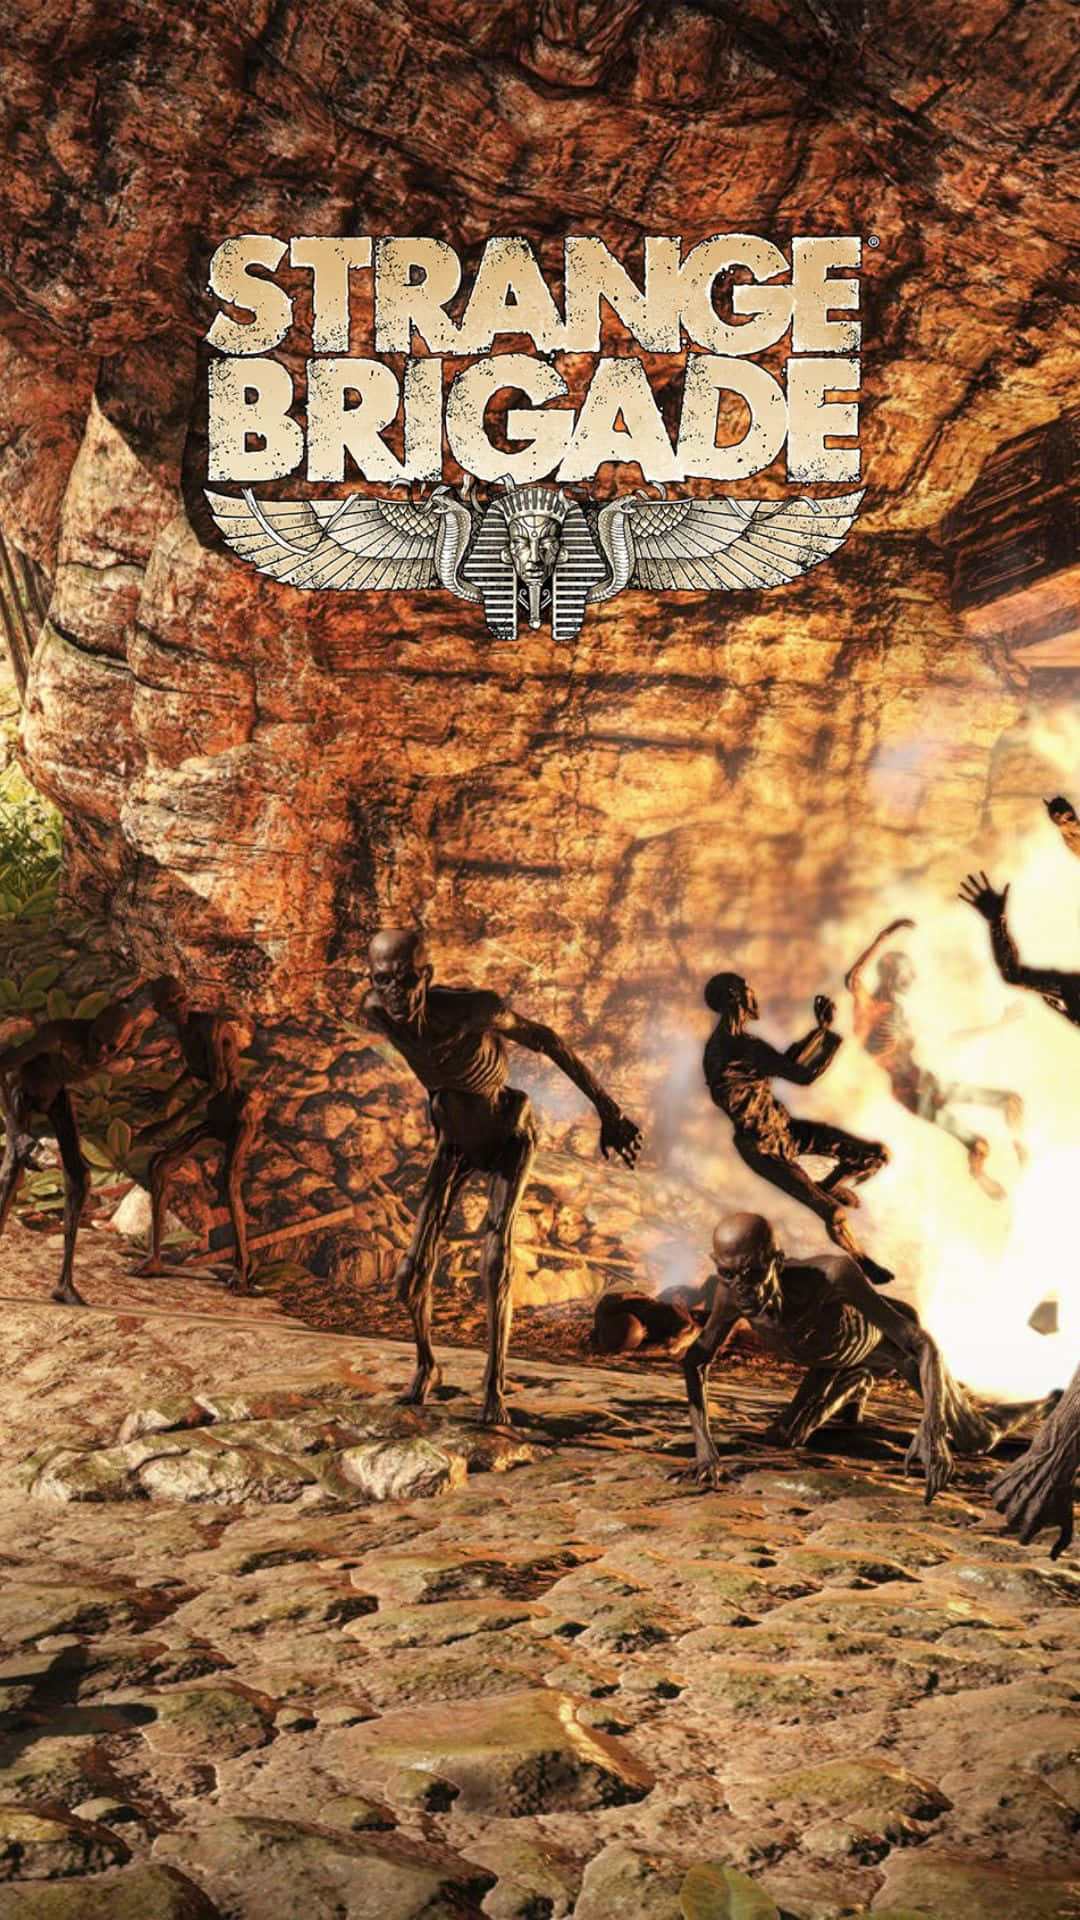 Action-packed Strange Brigade Adventure on Android